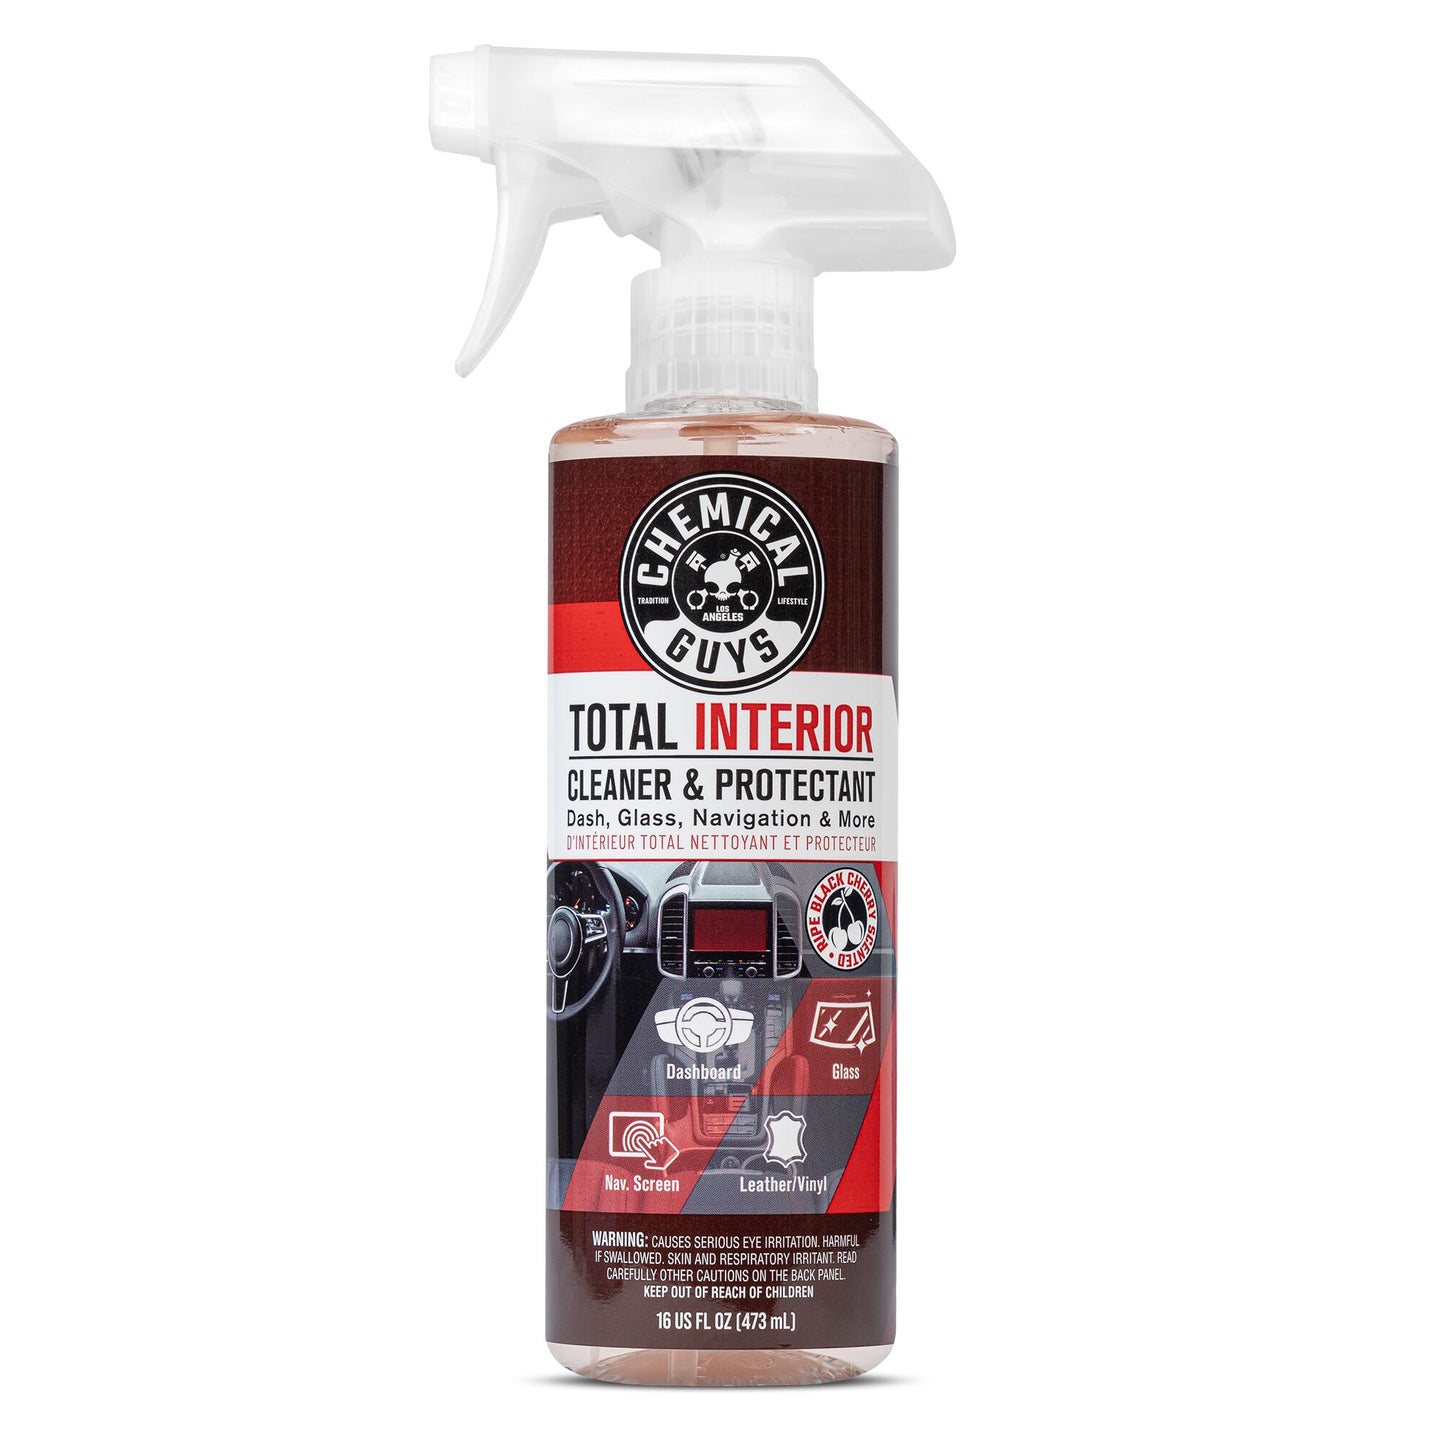 All In One Leather Cleaner Conditioner & Protector